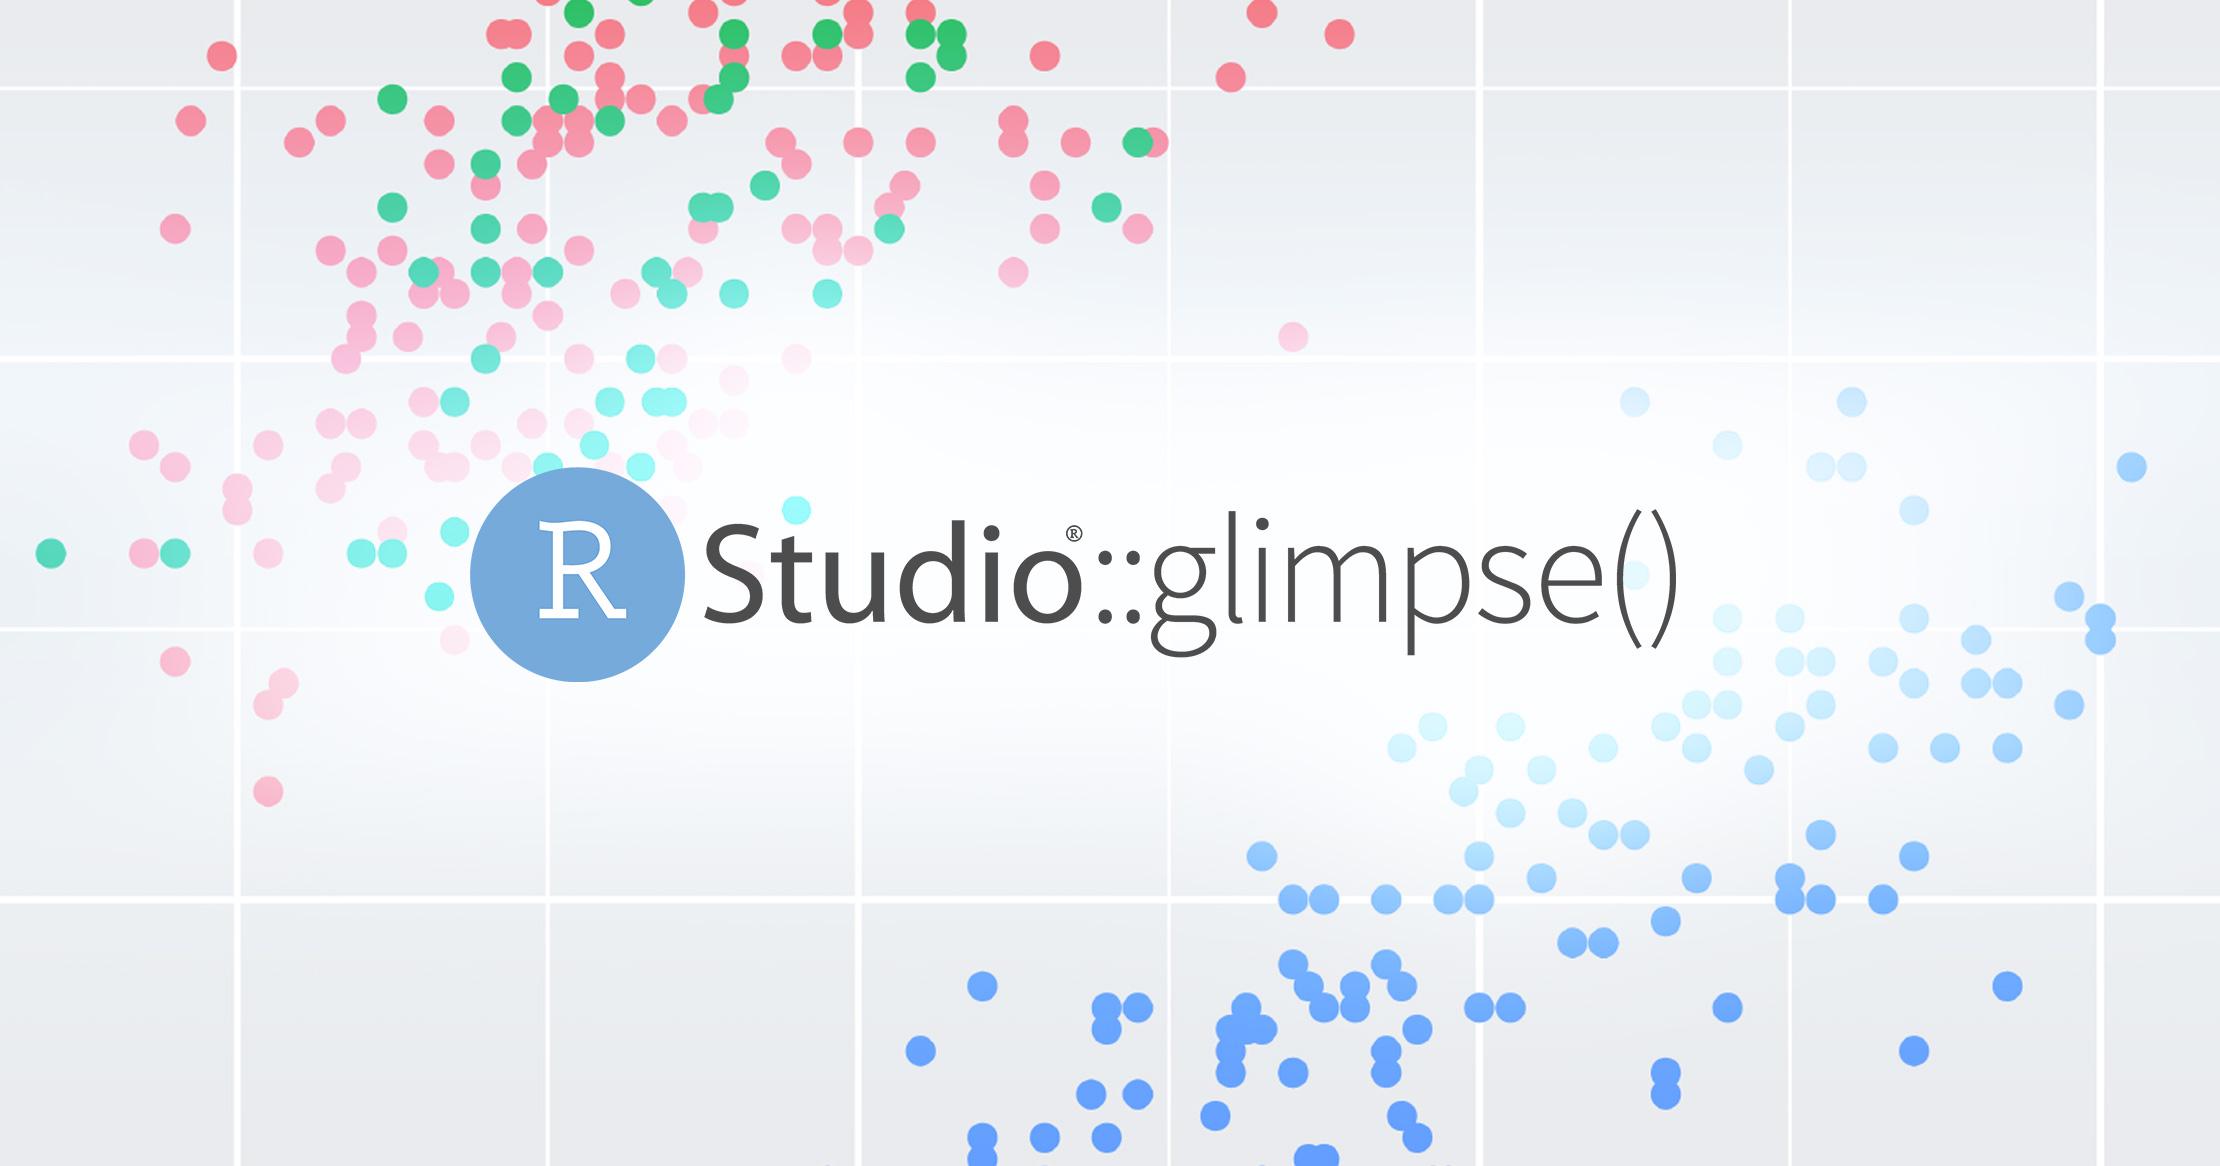 Thumbnail Plot output of a ggplot2 scatterplot with the RStudio glimpse logo on top.